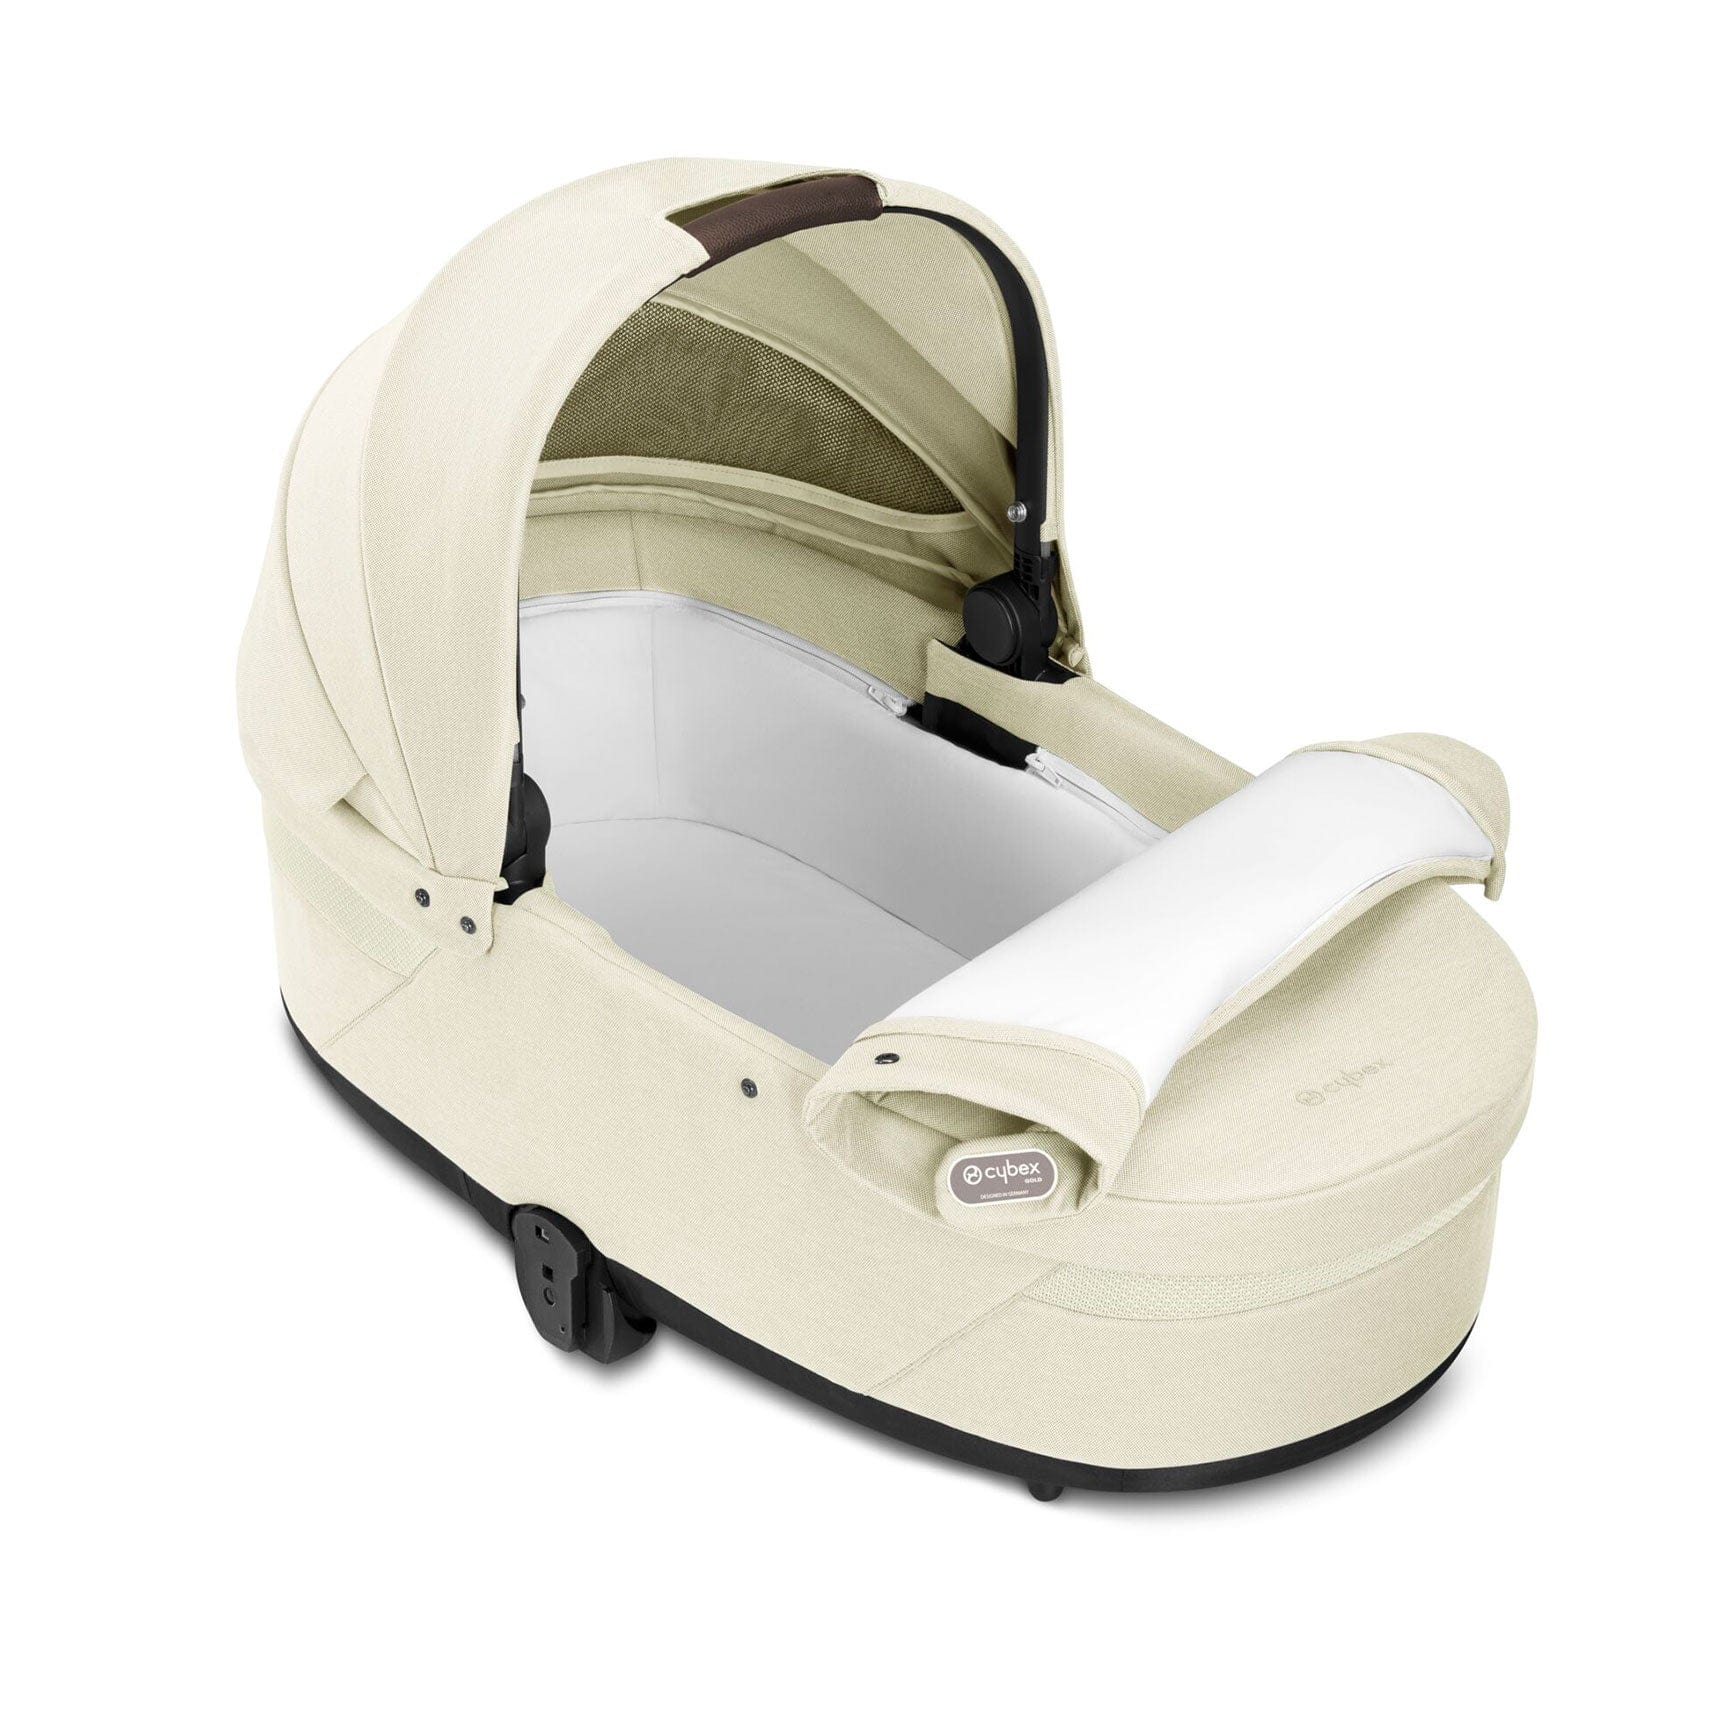 Cybex Balios Comfort Bundle in Taupe/Seashell Beige Travel Systems 127457-TPE-SEA-BEI 4063846318124